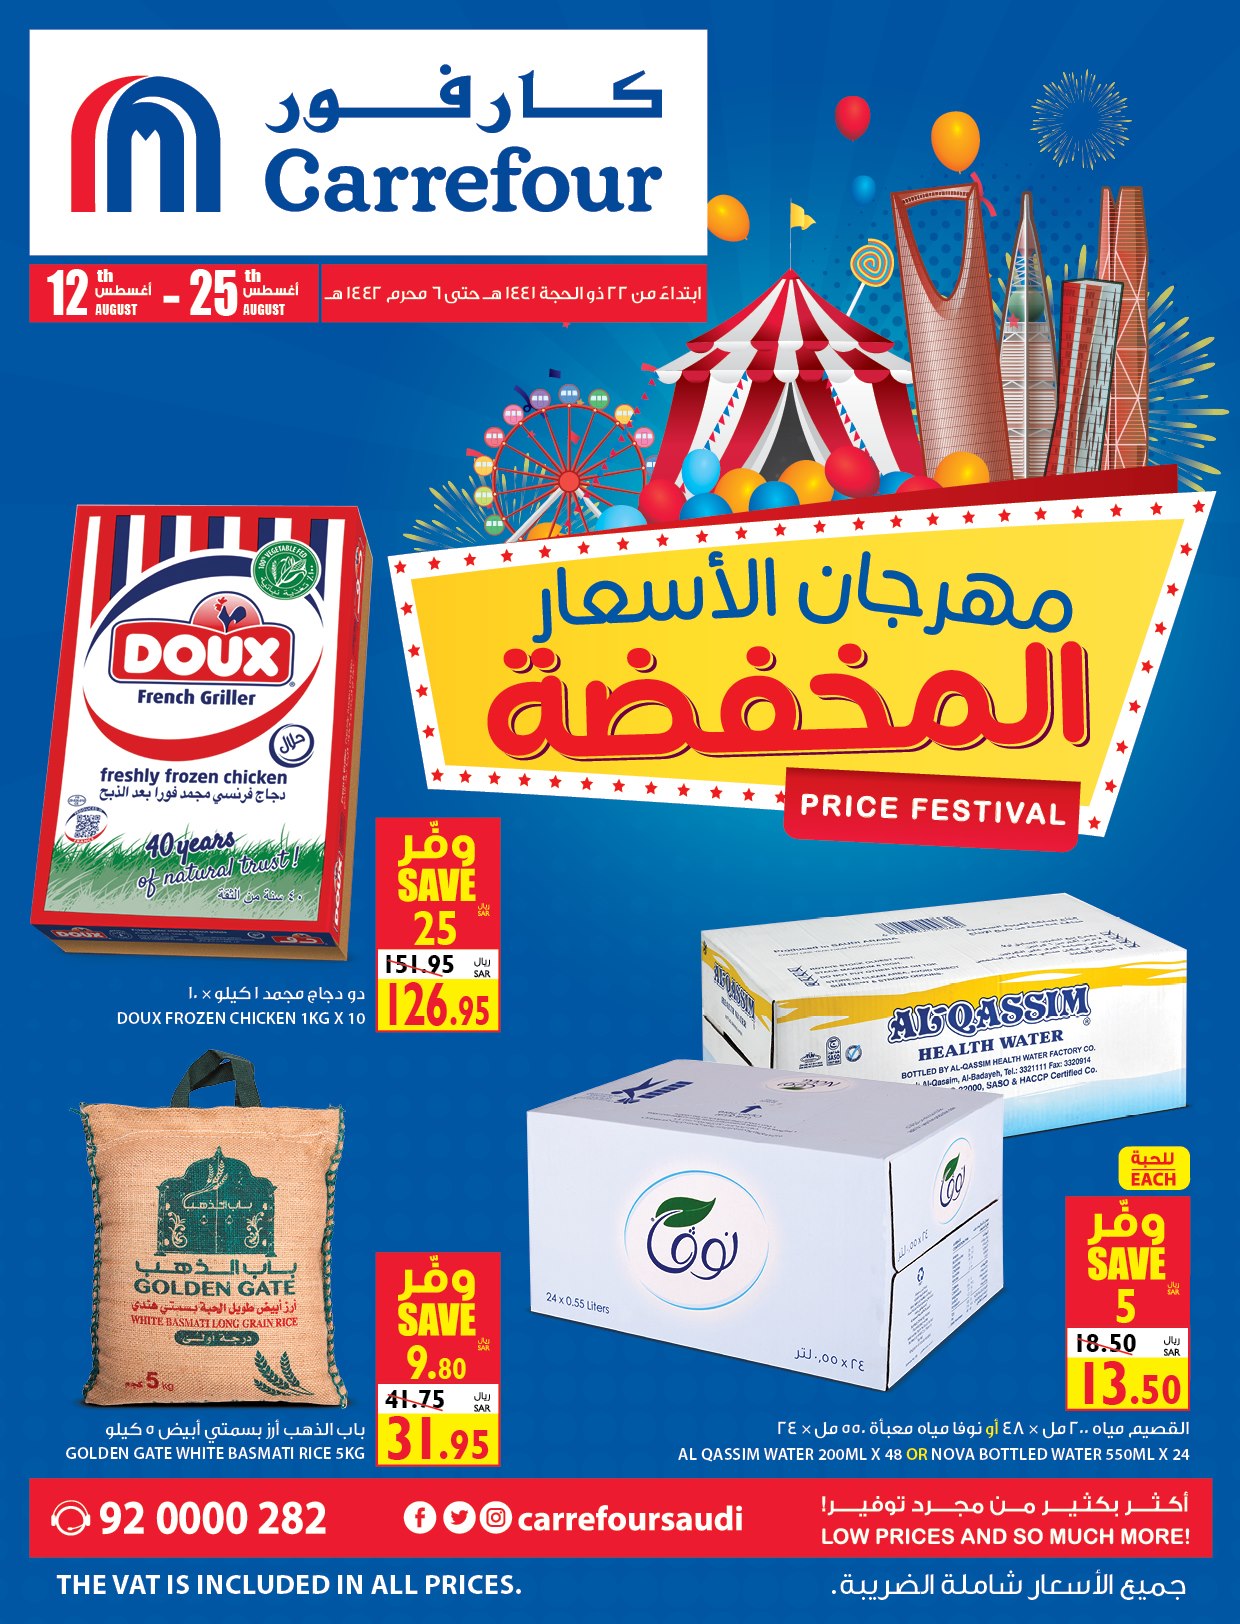 Carrefour Festival Offers from 12/8 till 25/8 | Carrefour KSA 2